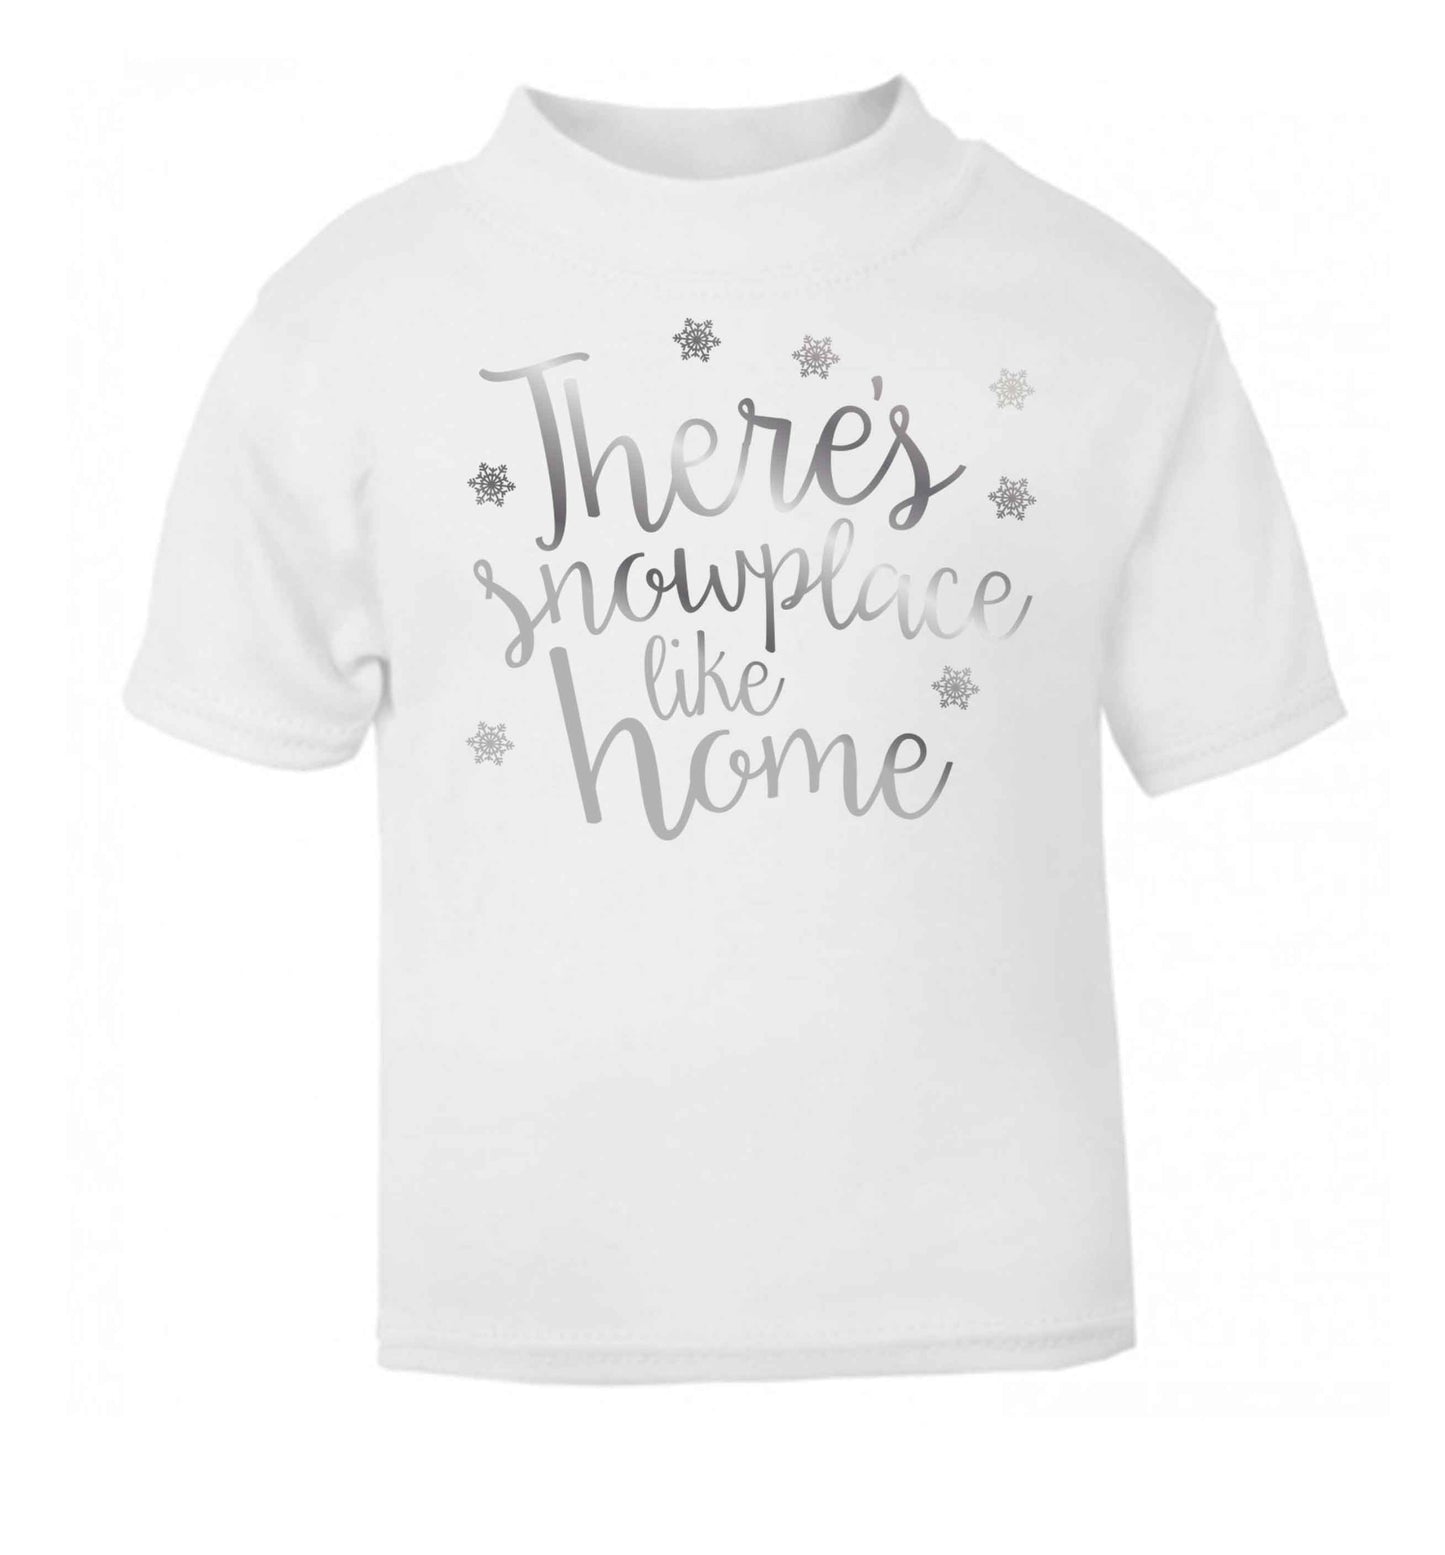 There's snowplace like home - metallic silver white baby toddler Tshirt 2 Years